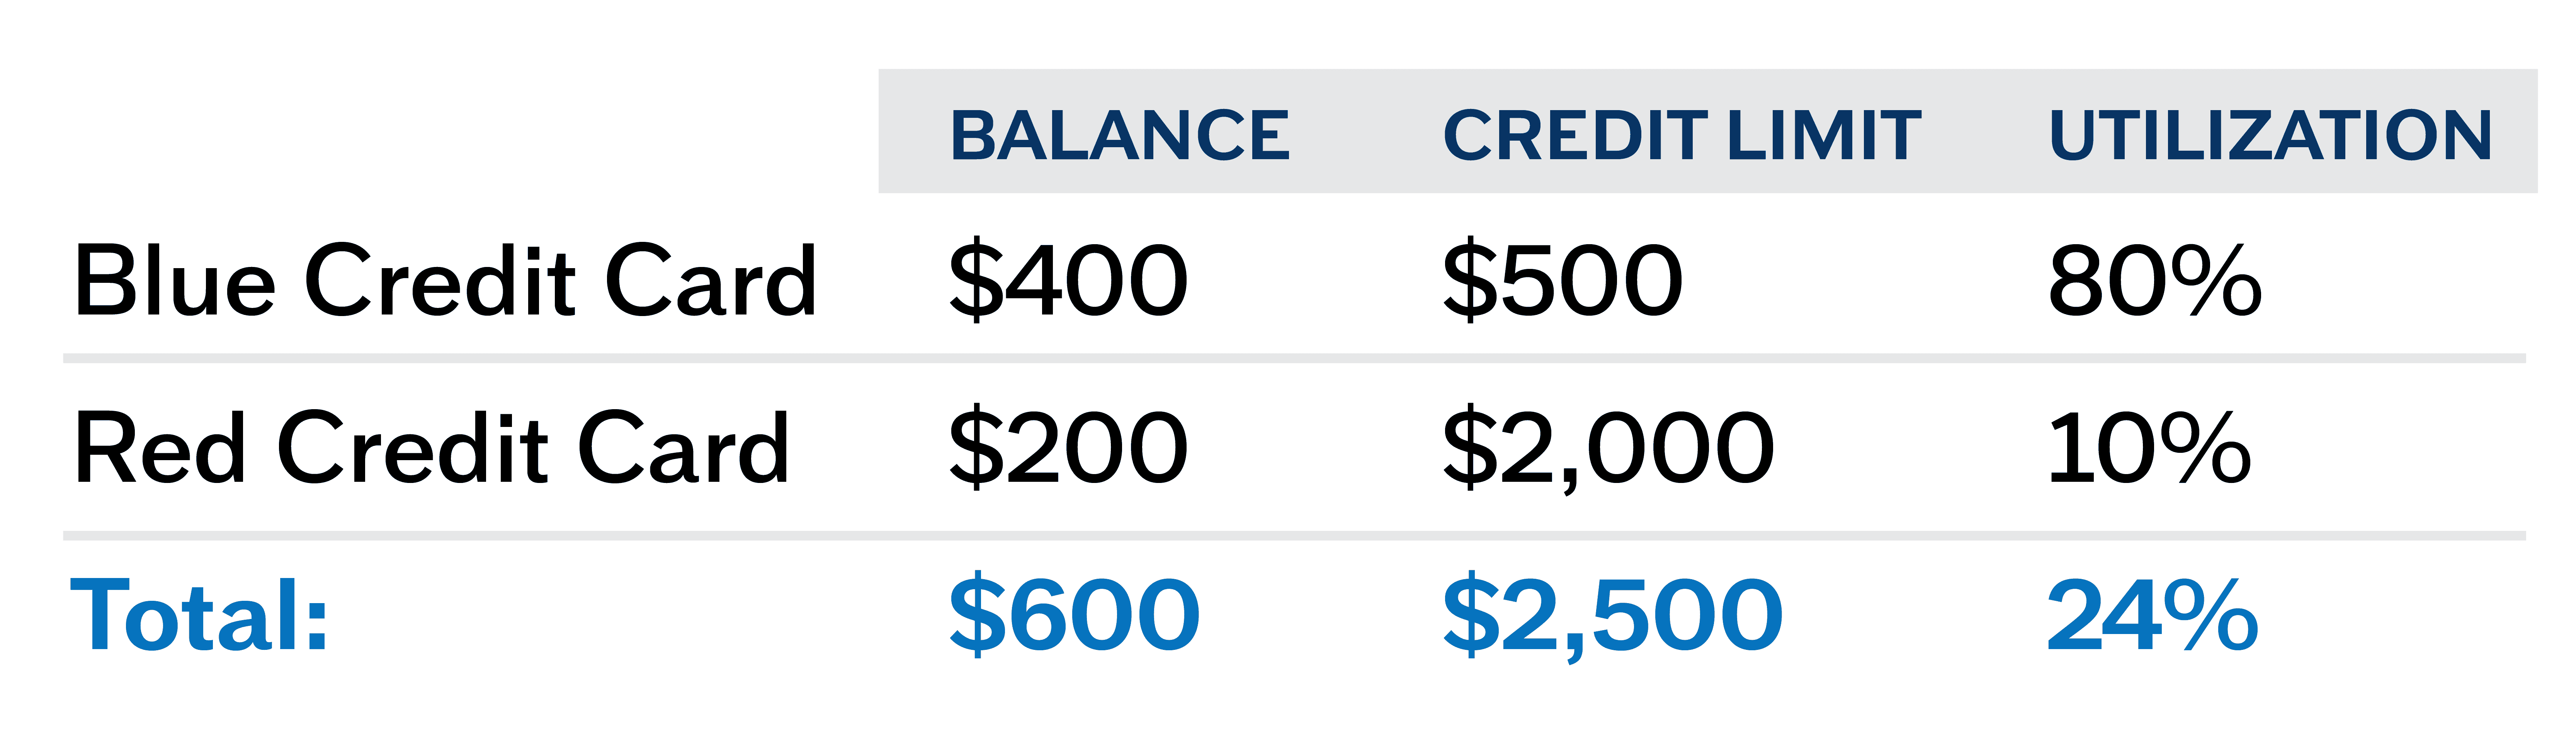 Chart comparing the credit utilization rate of different credit cards